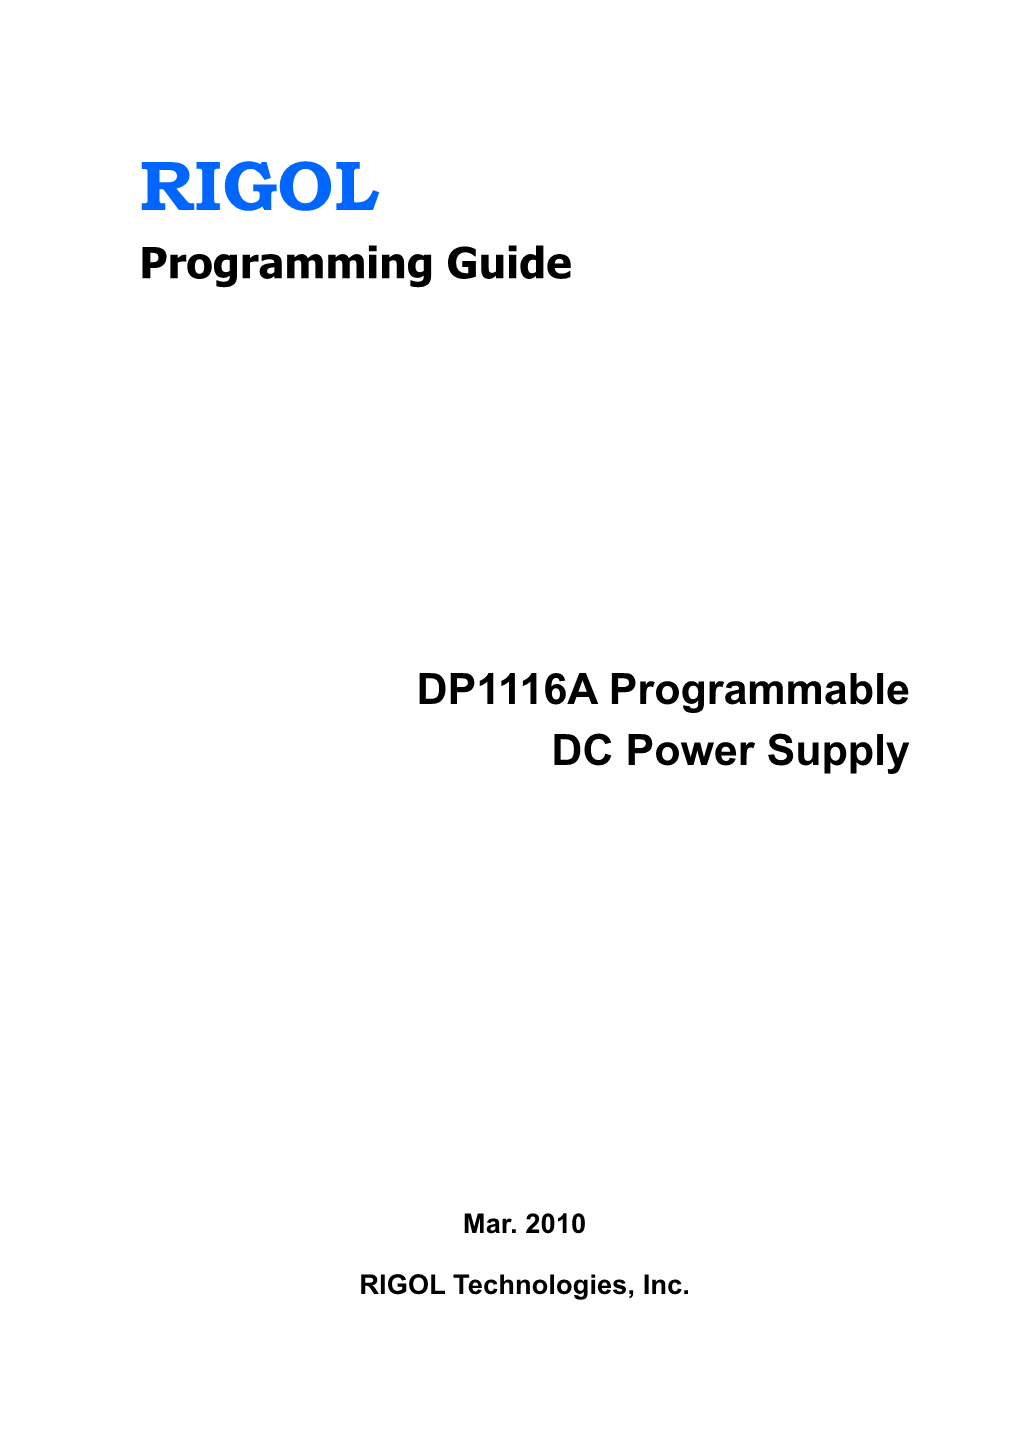 Programming Guide DP1116A Programmable DC Power Supply